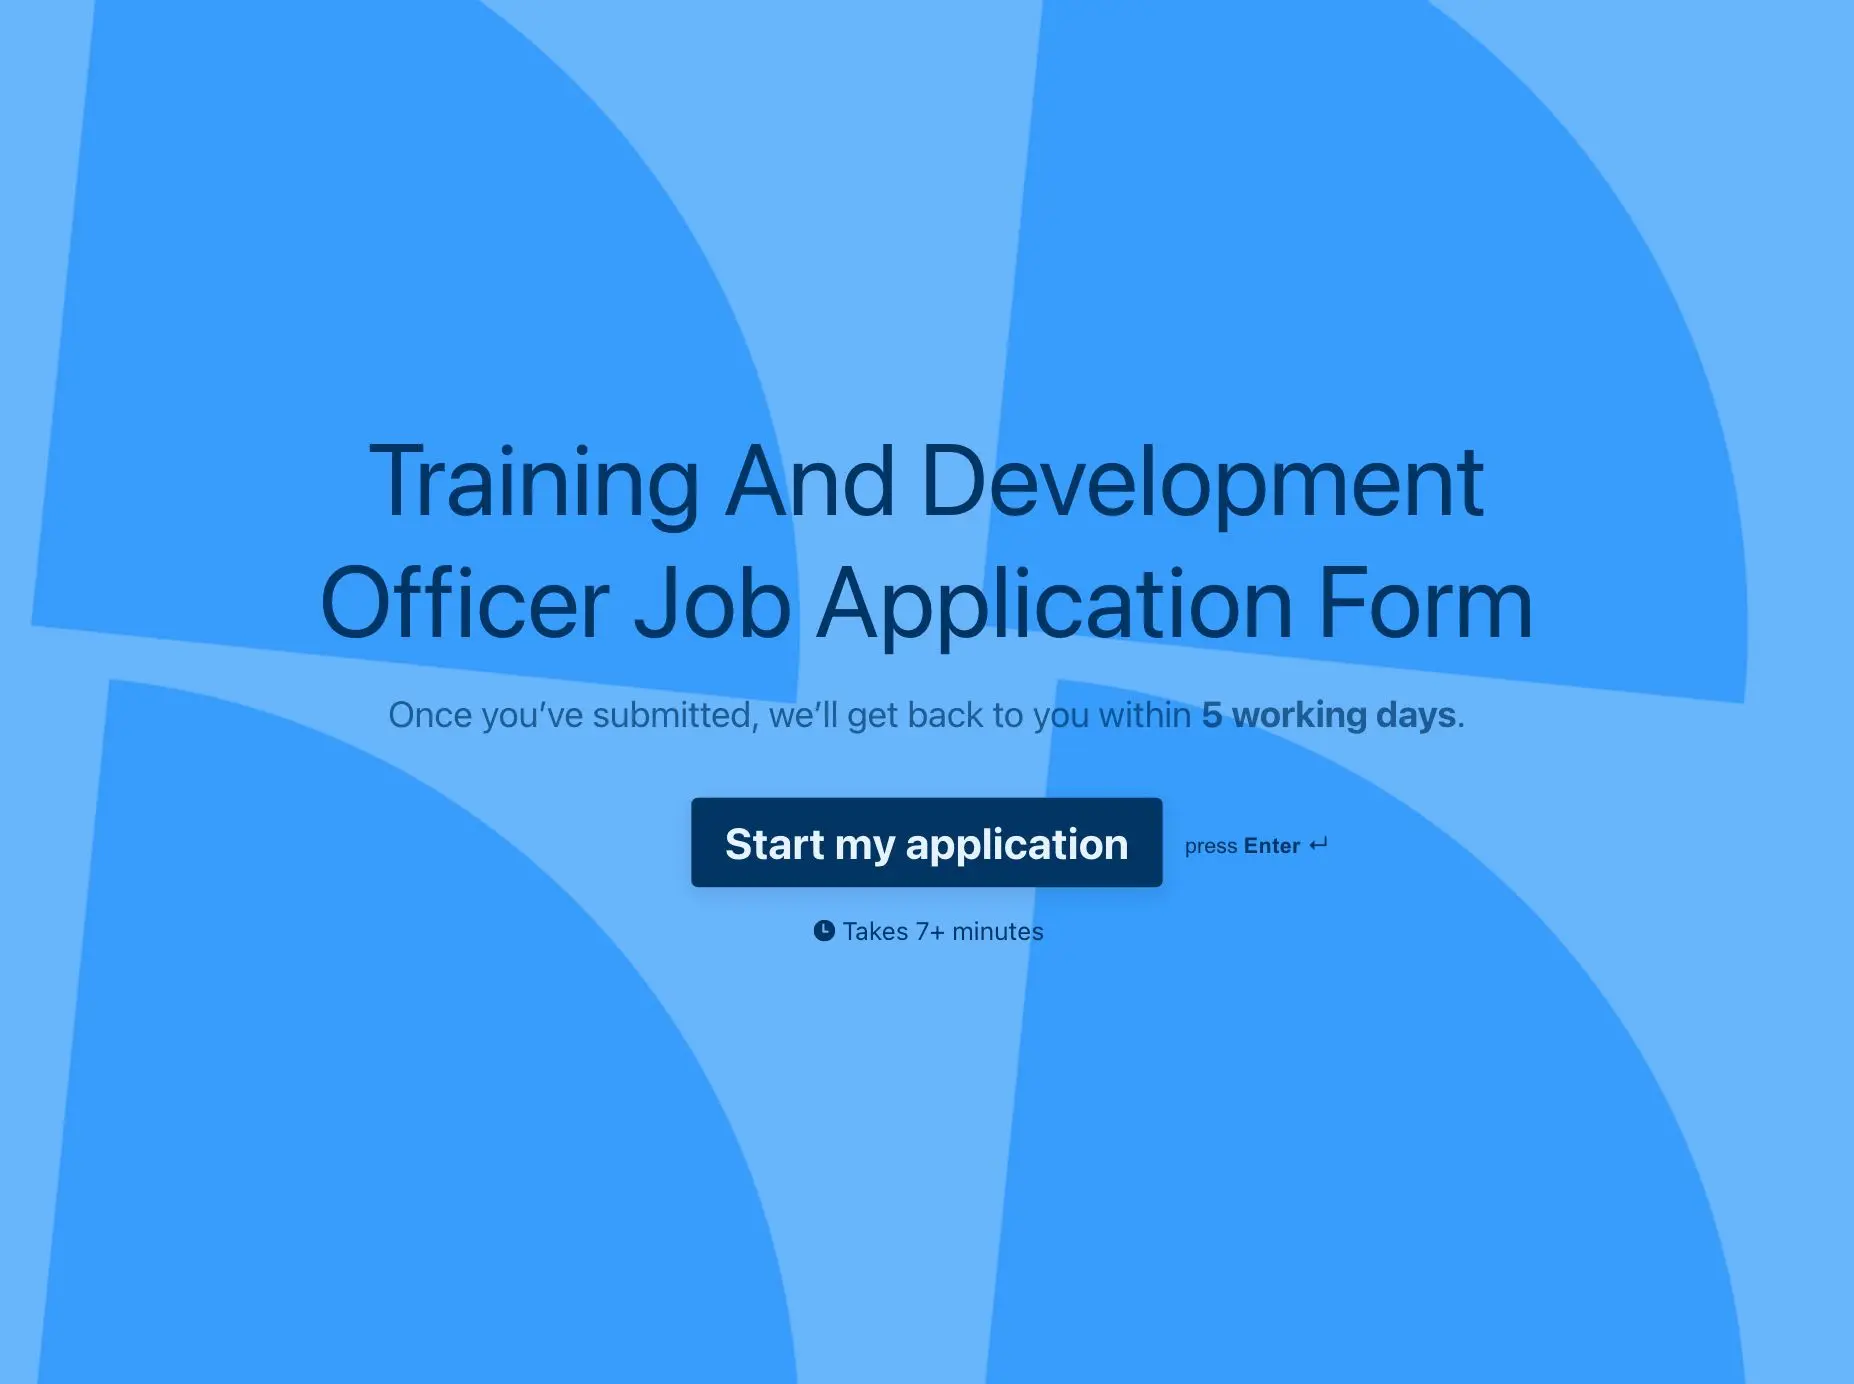 Training And Development Officer Job Application Form Template Hero